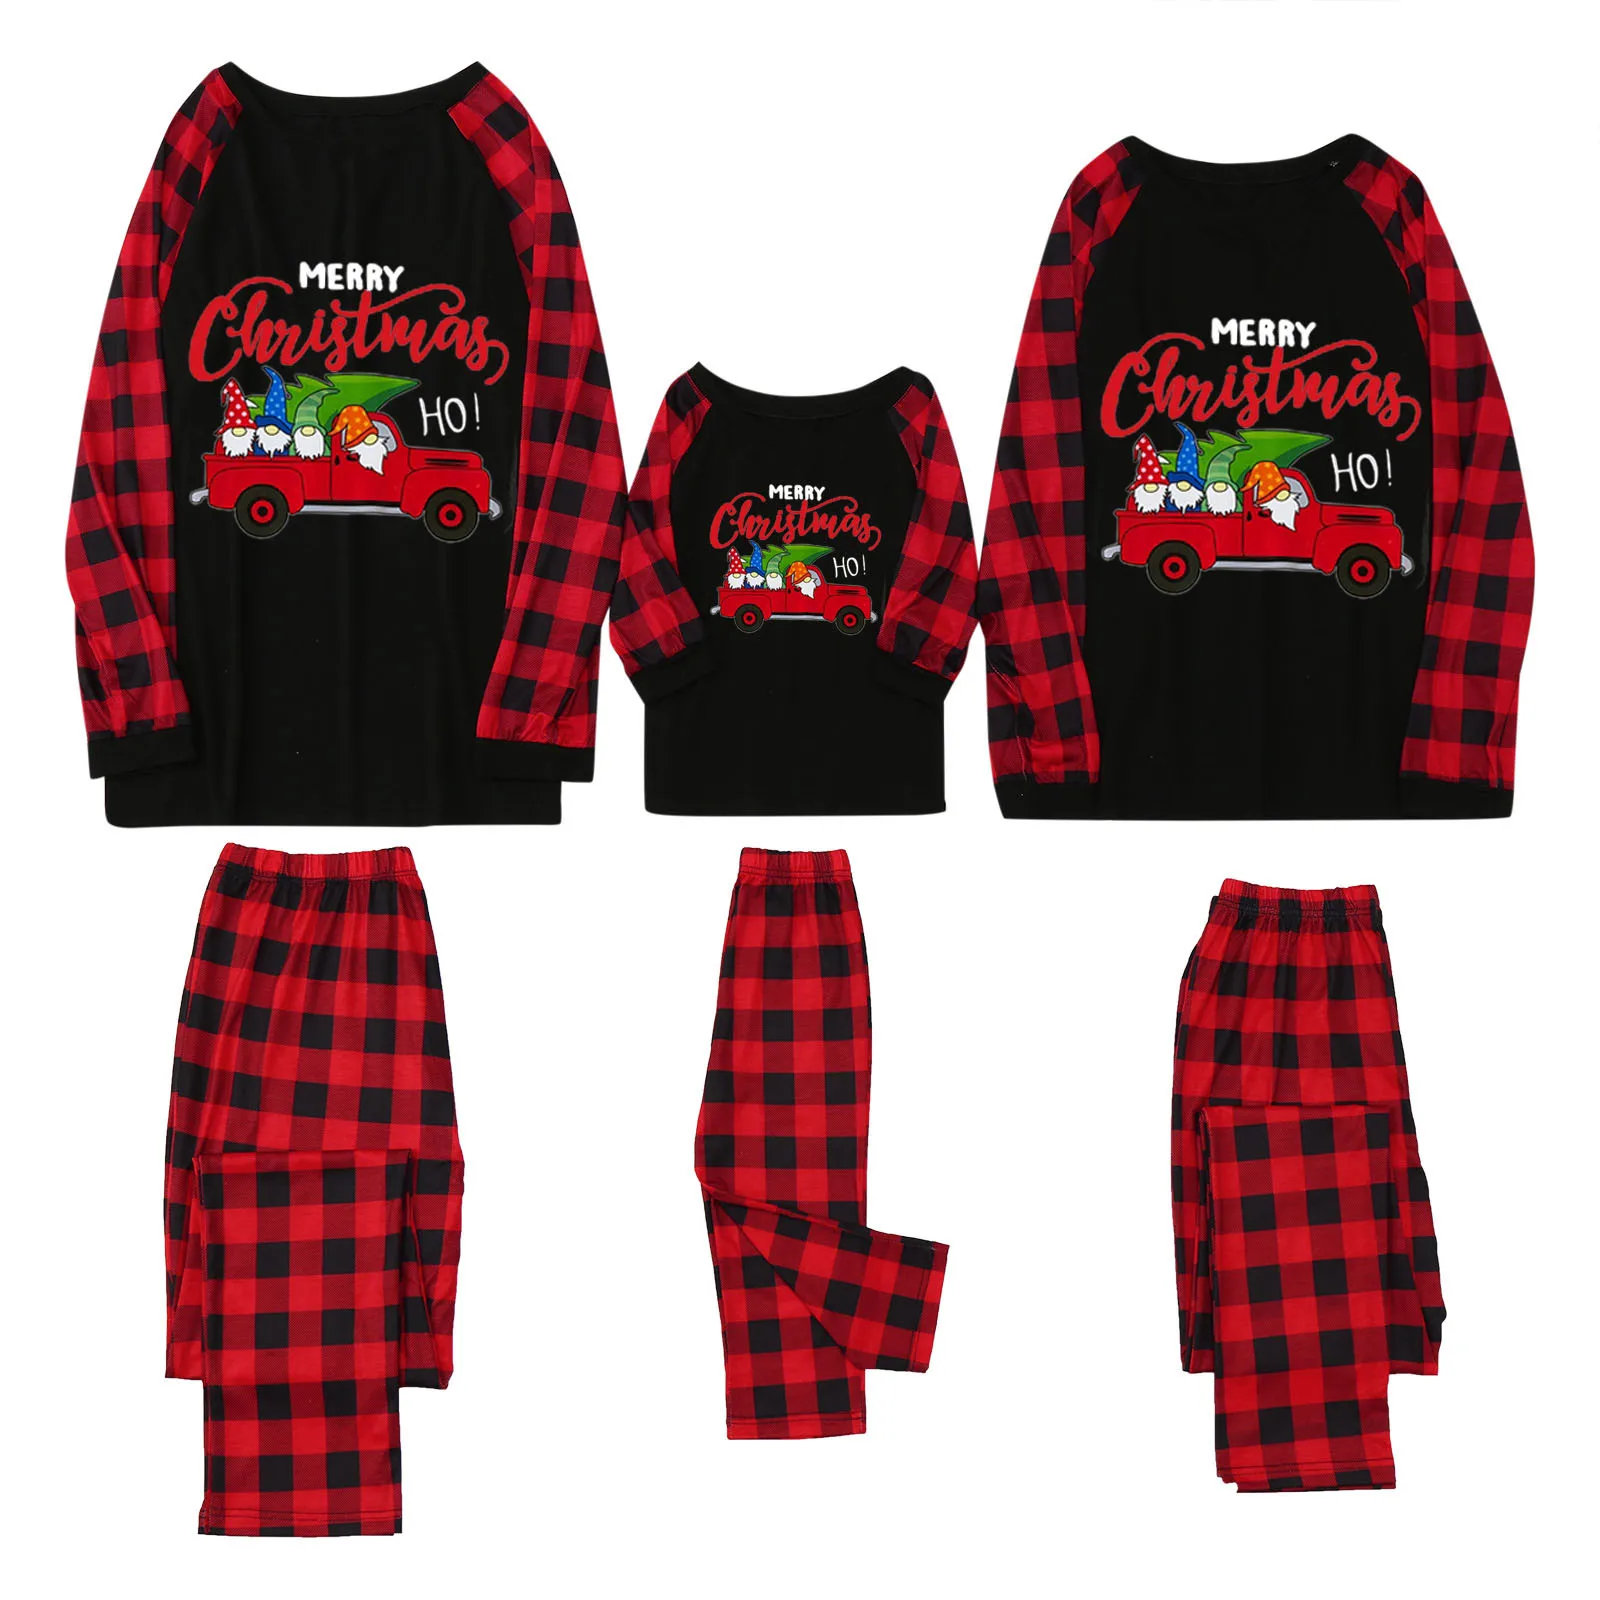 

Family Matching Outfit Lattice Christmas Pajamas Xmas Pajamas Pjs Sleepwear Outfits Matching Set Sleepwear Пижама Romper R5